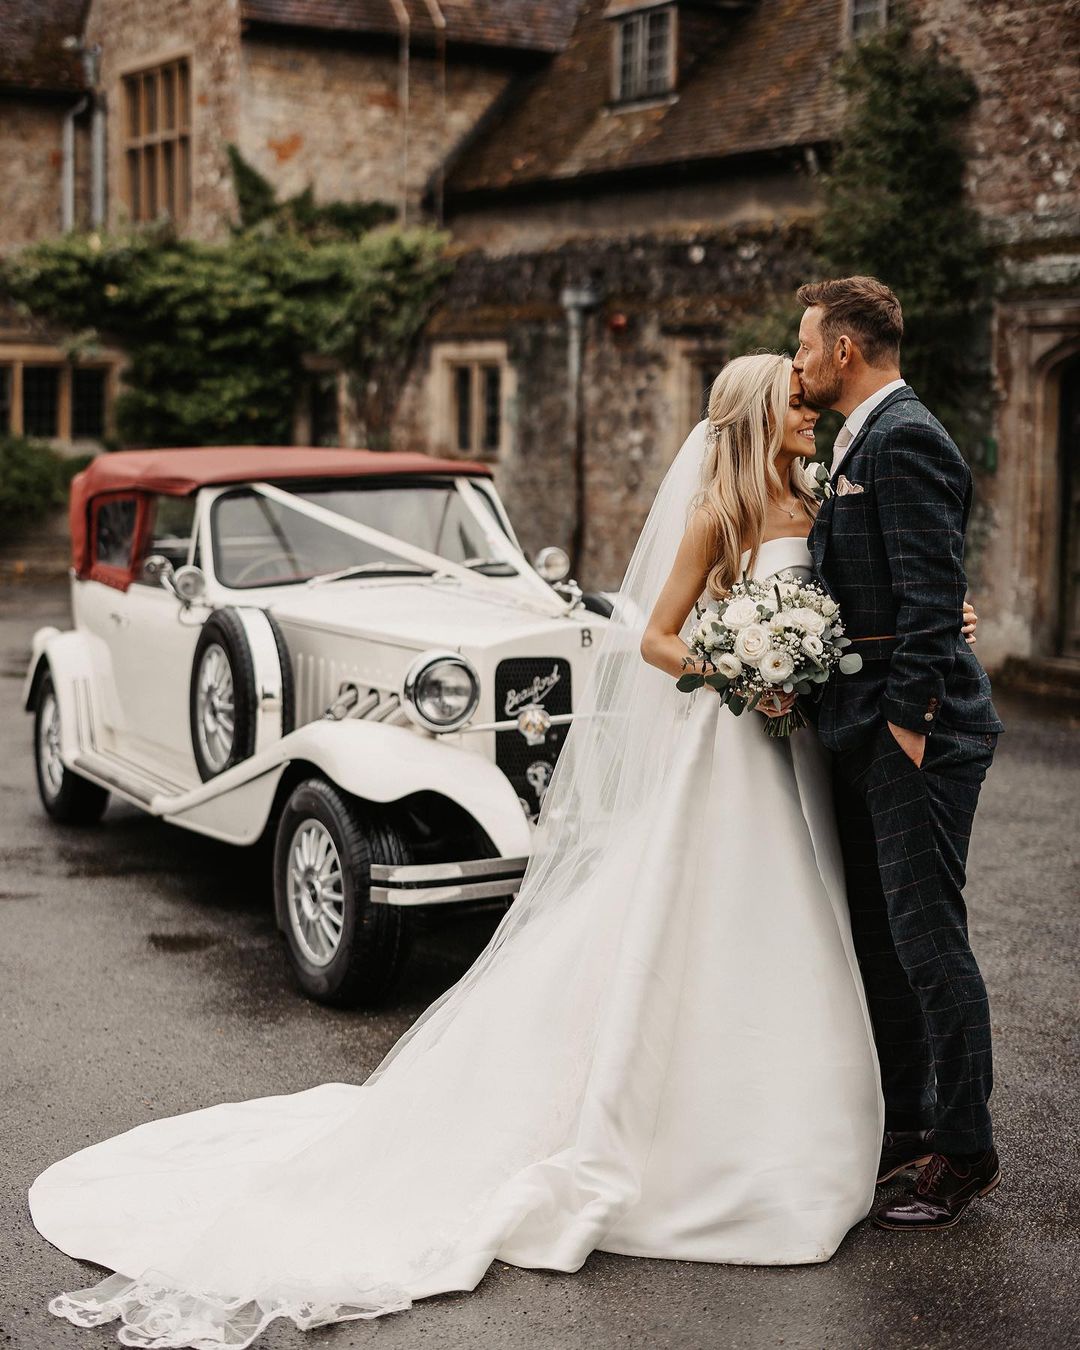 a romantic picture of a newly wed couple with their classic wedding car